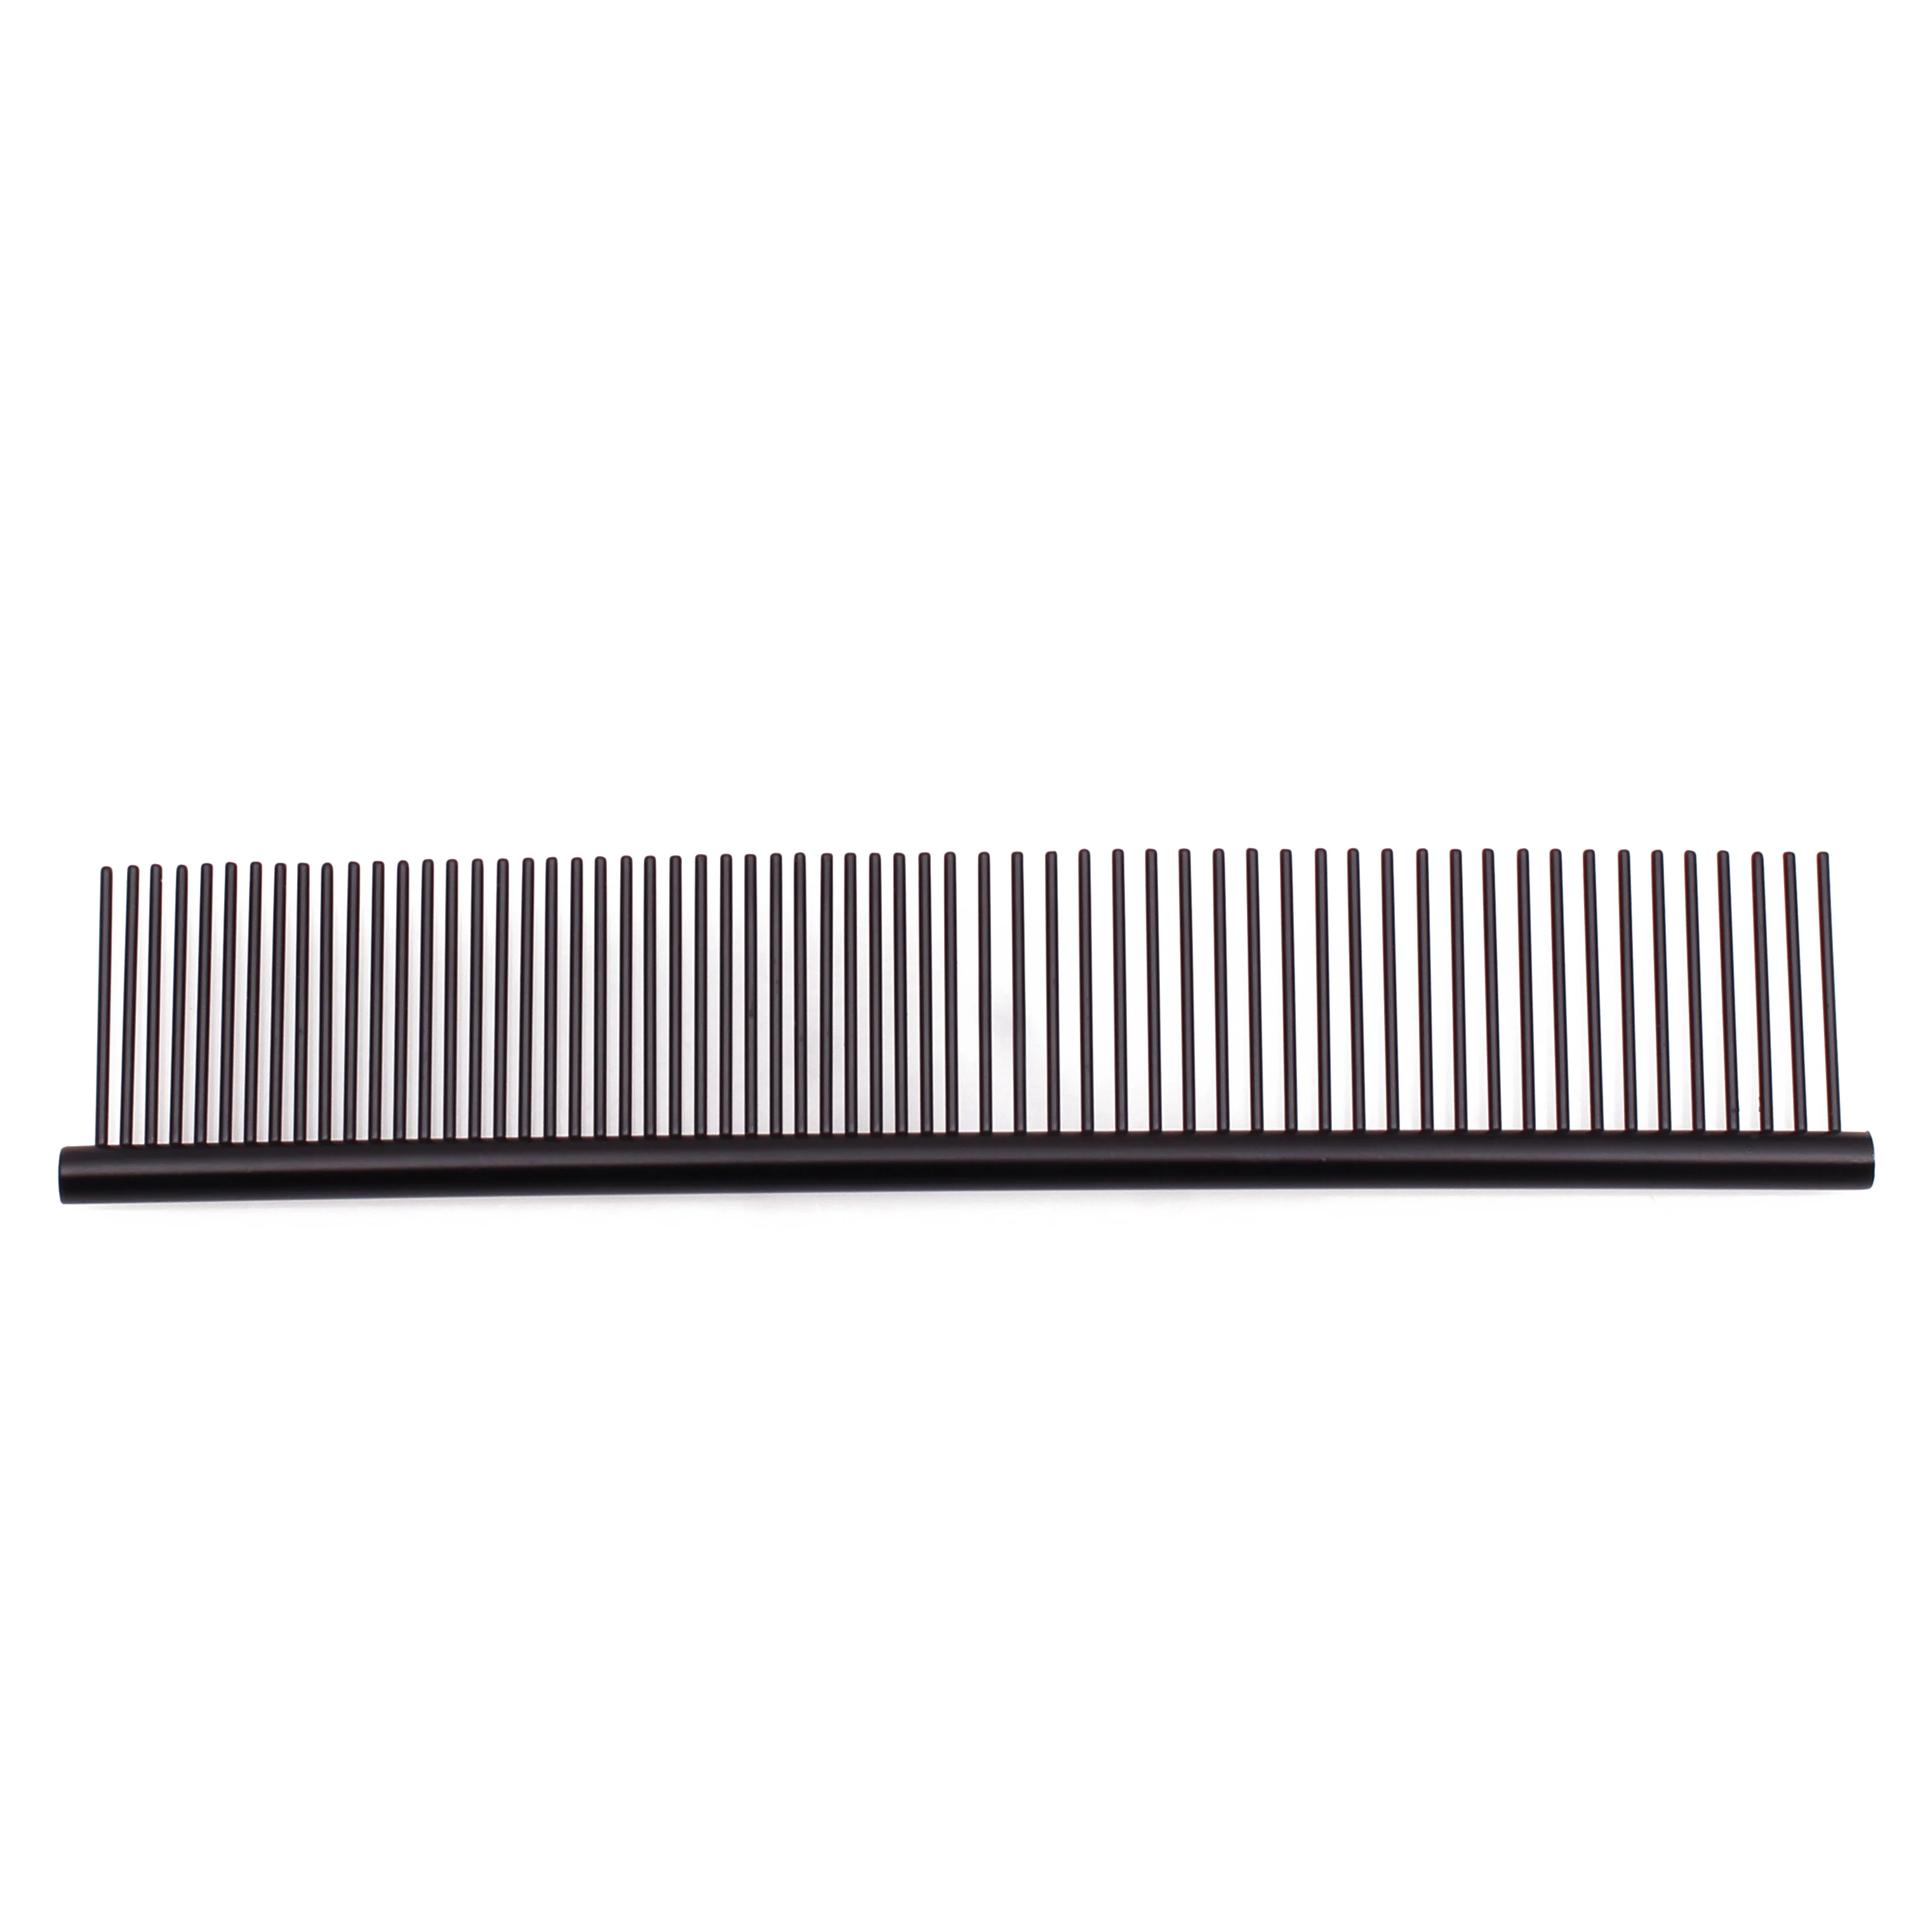 

1000 Pcs Black Stainless Steel Pet Grooming Comb Row Teeth Needle Hair Trimmer Cat Dog Grooming Massage Comb Wide Tooth C6703, Customized color